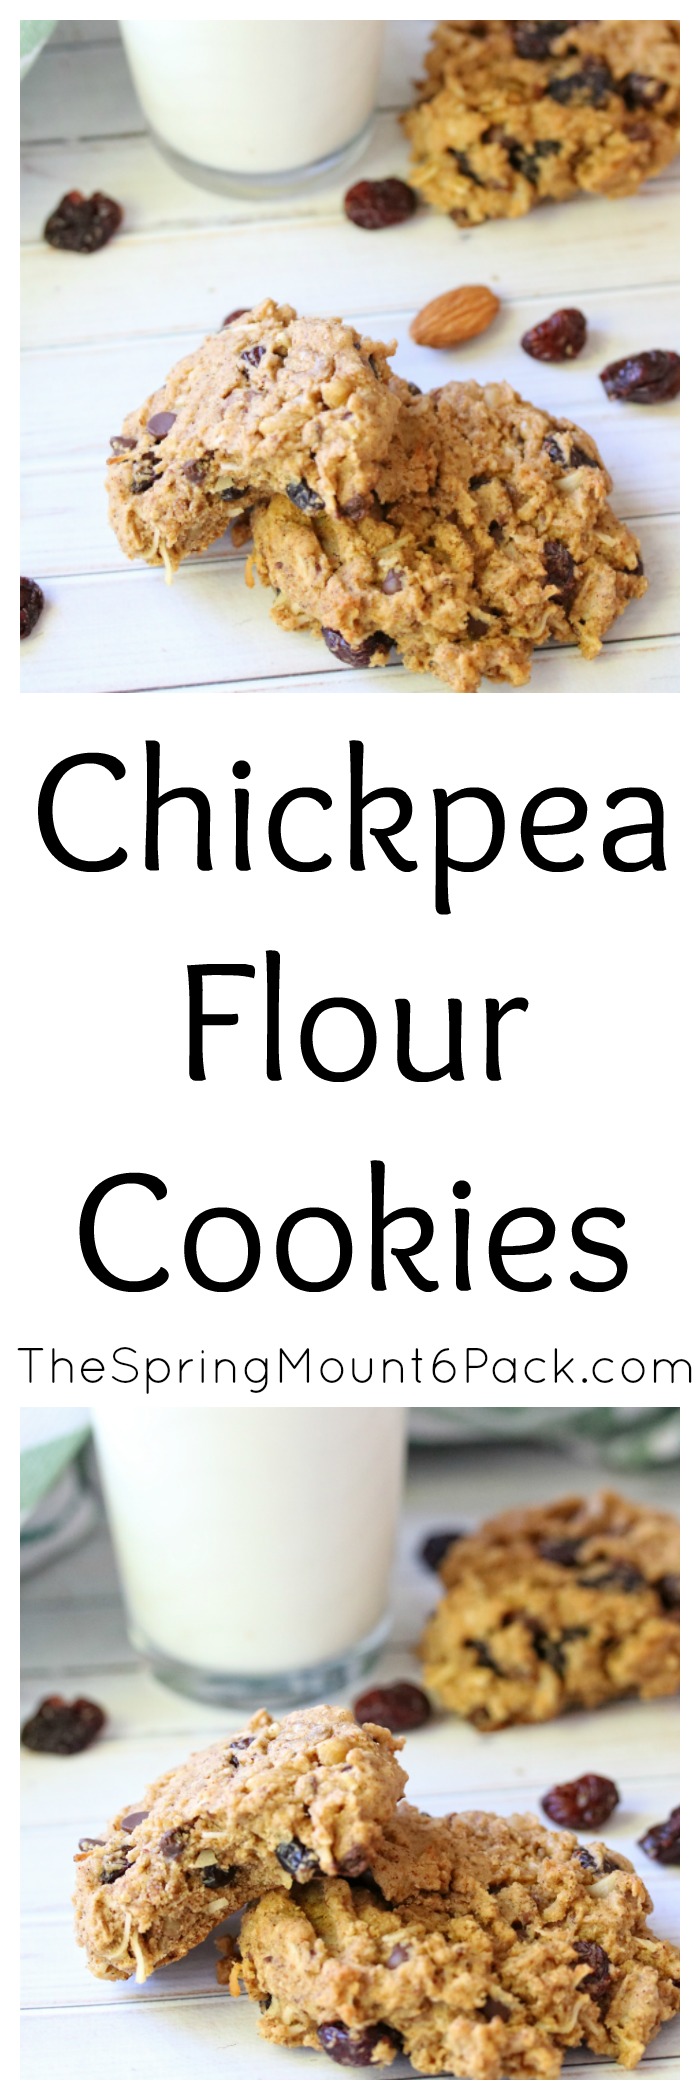 Whether you are watching your carbs or need gluten free recipes, chickpea flour cookies are a delicious gluten free cookie option.